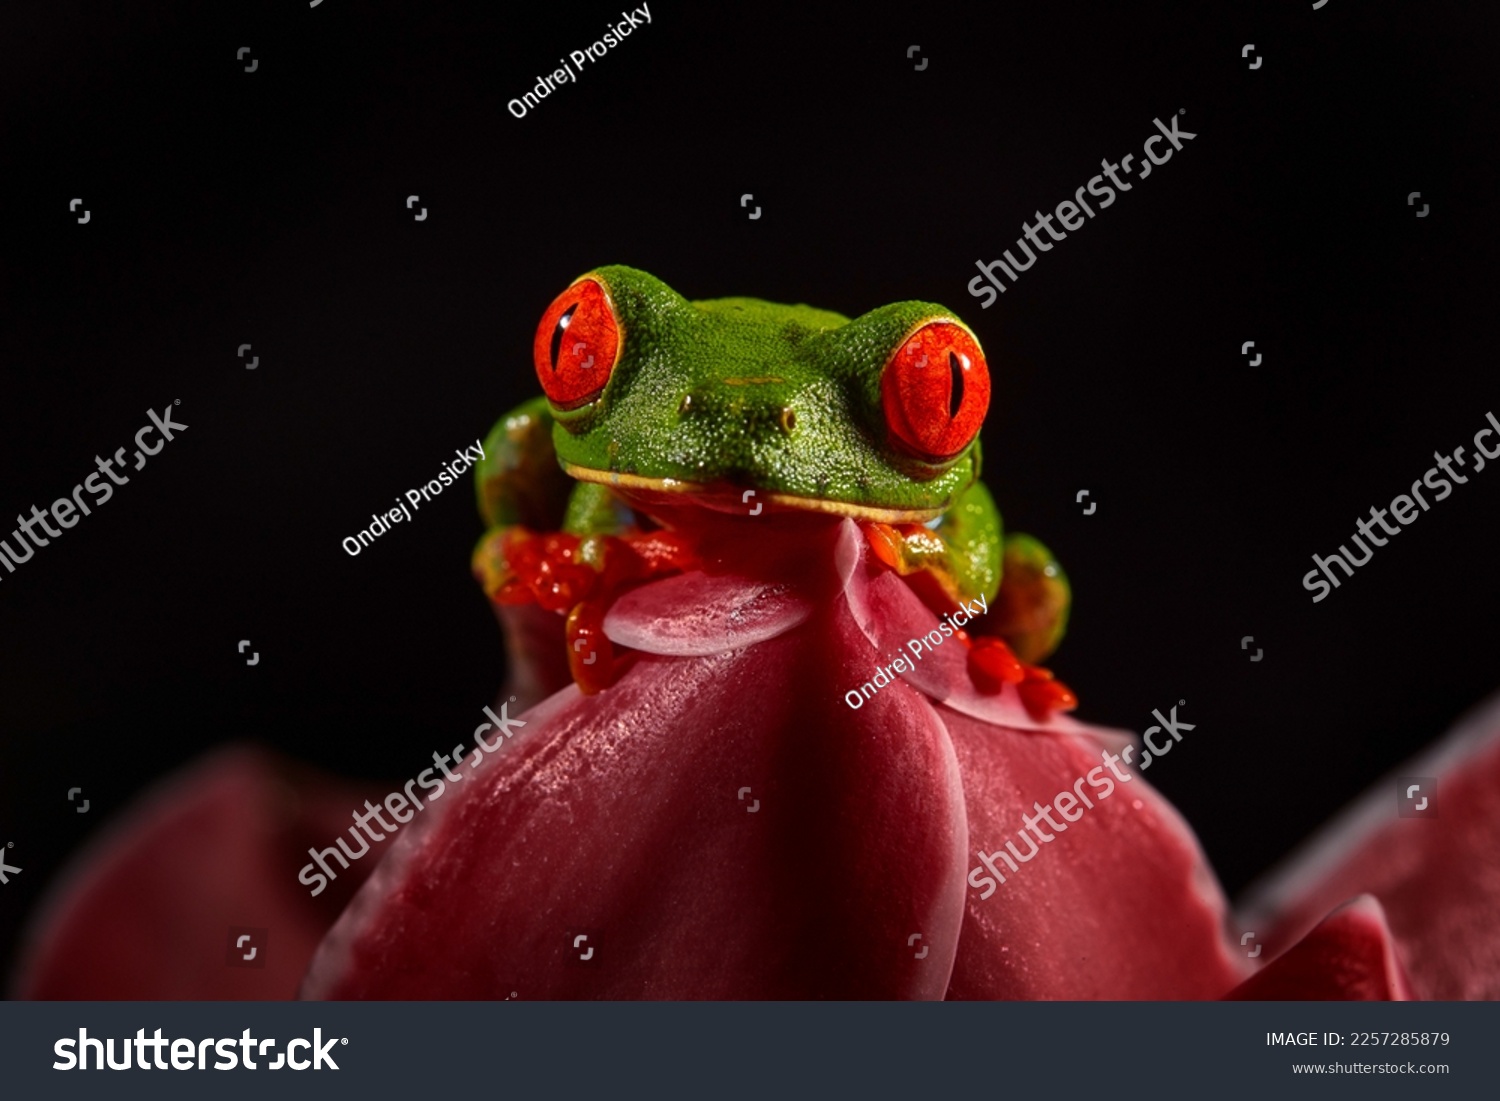 Wildlife tropic. Red-eyed Tree Frog, Agalychnis callidryas, animal with big red eyes, in the nature habitat. Beautiful amphibian in the night forest, exotic animal from central America on red flower. #2257285879